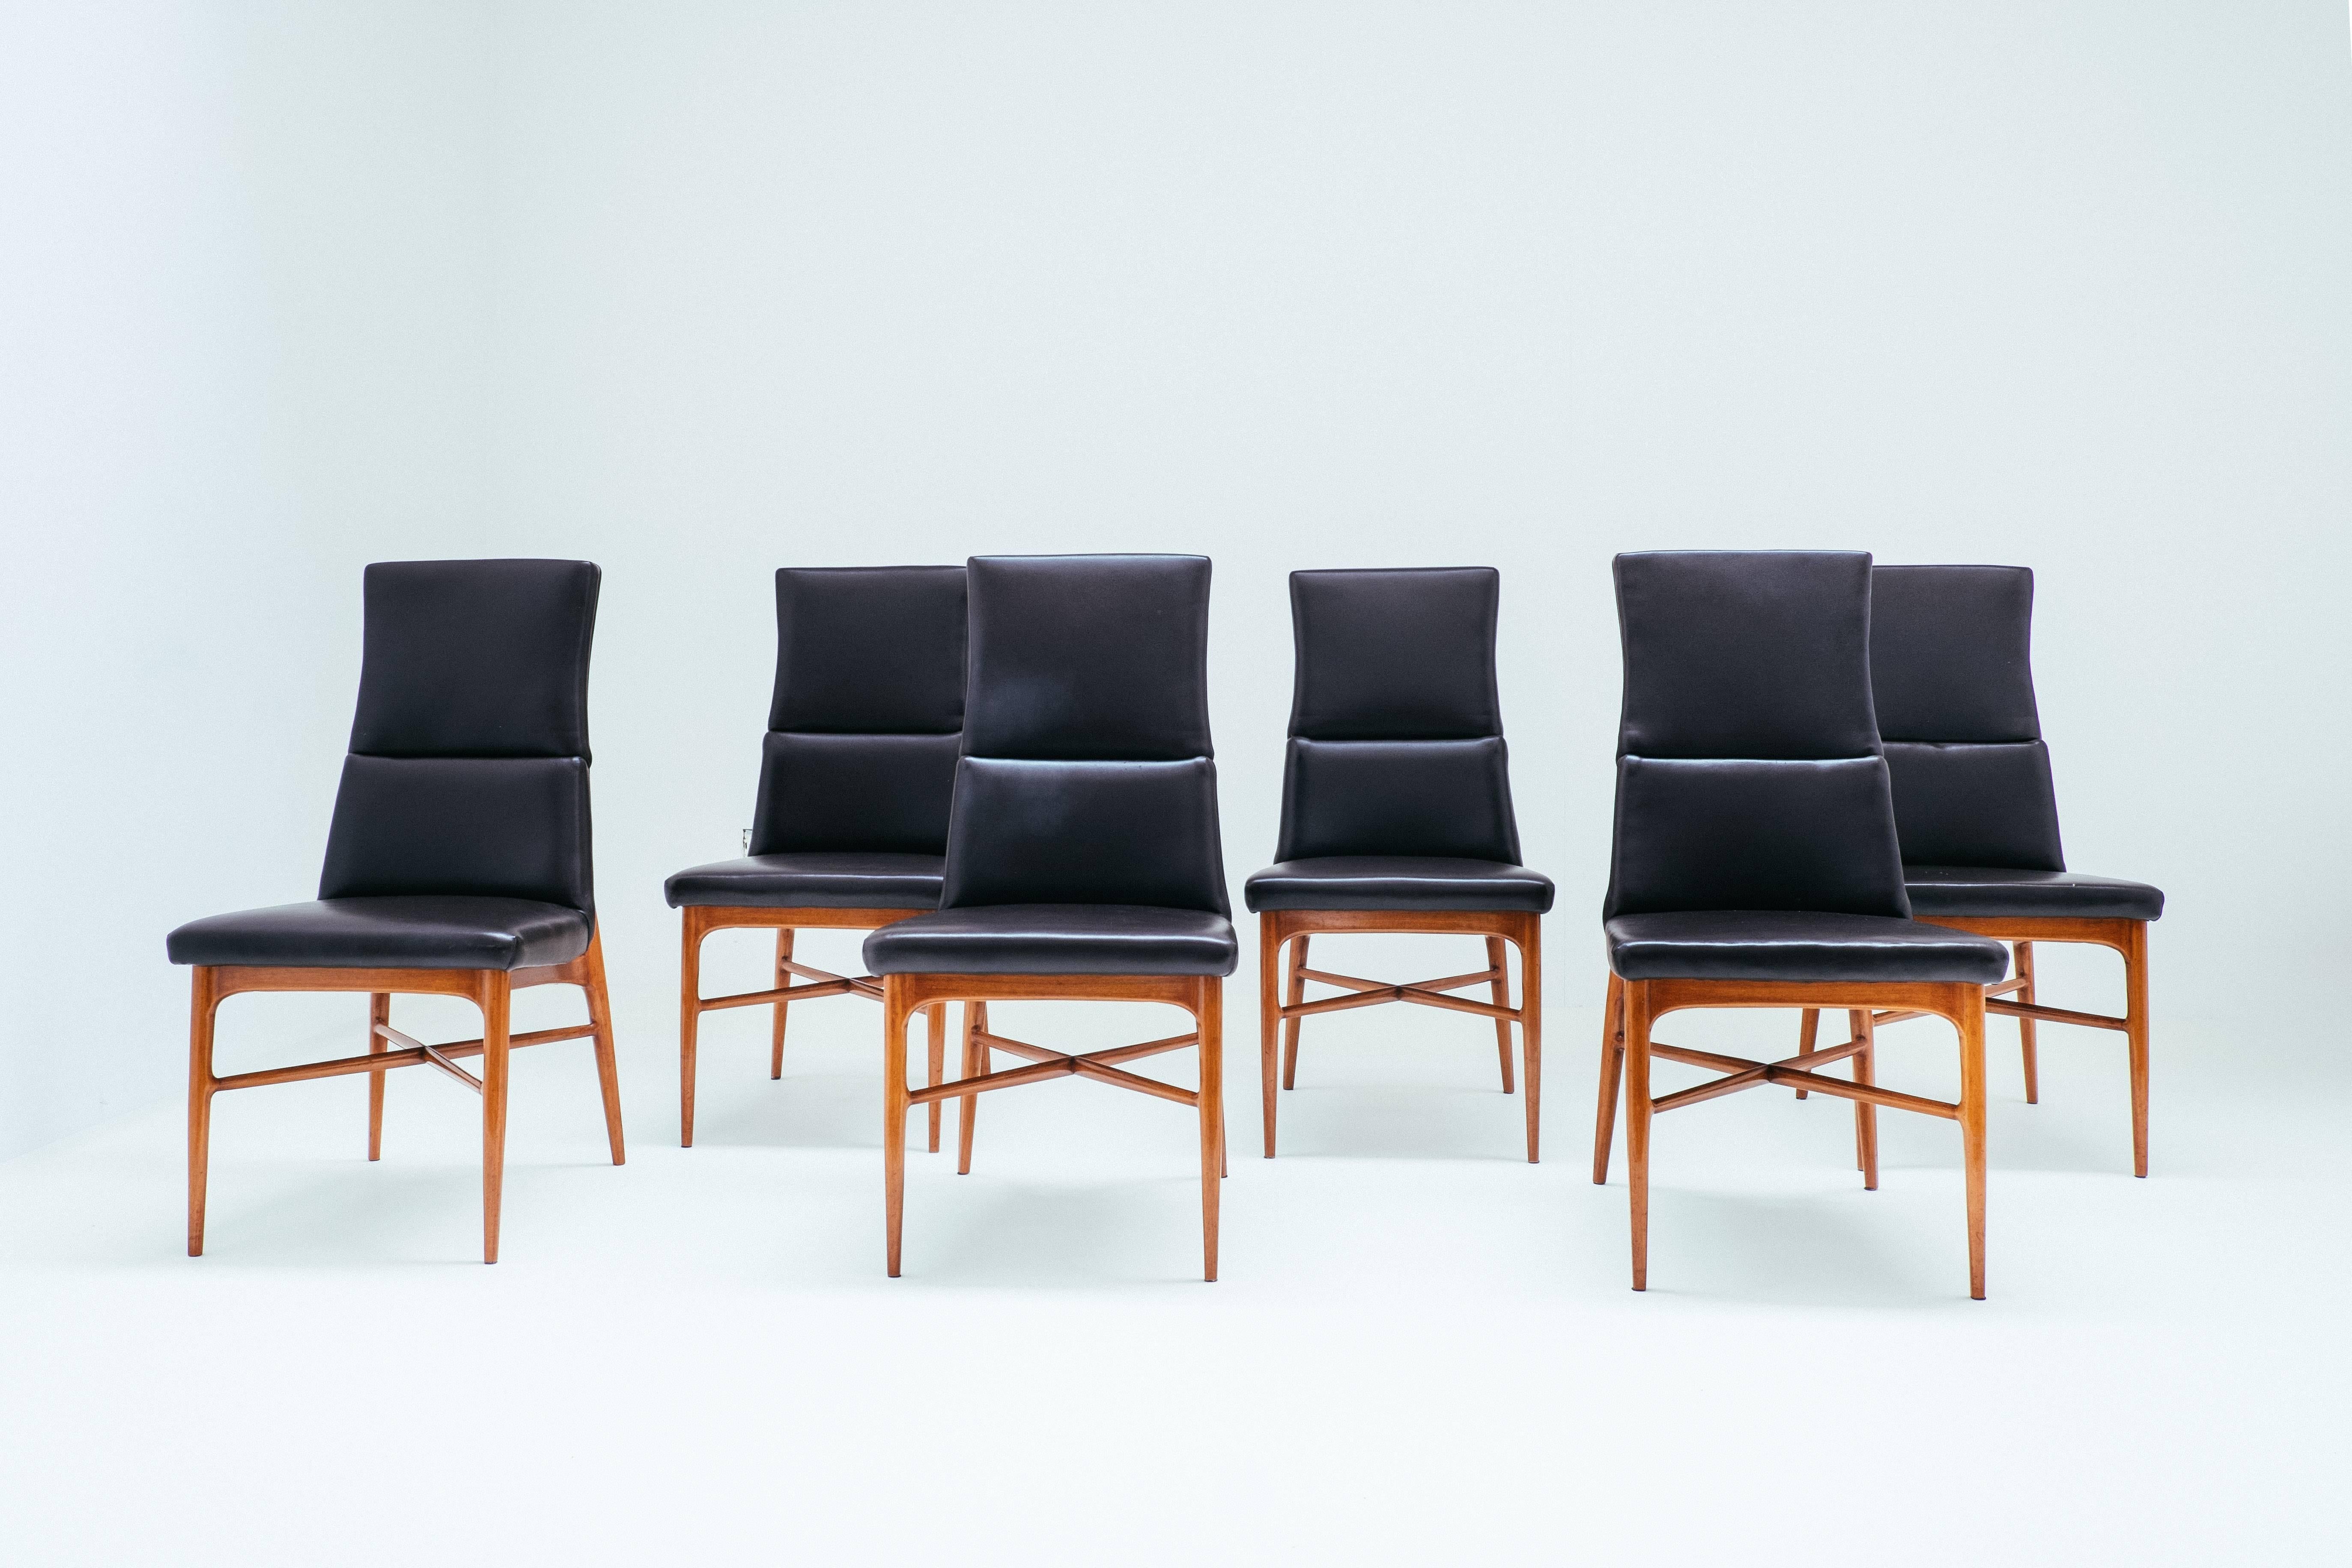 A truly important set of rare chairs by De Coene. Remarkable woodworking in the best tradition with the richest of material.
The Madison series were named after the opening of a De Coene showroom on Madison Avenue New York beginning of the